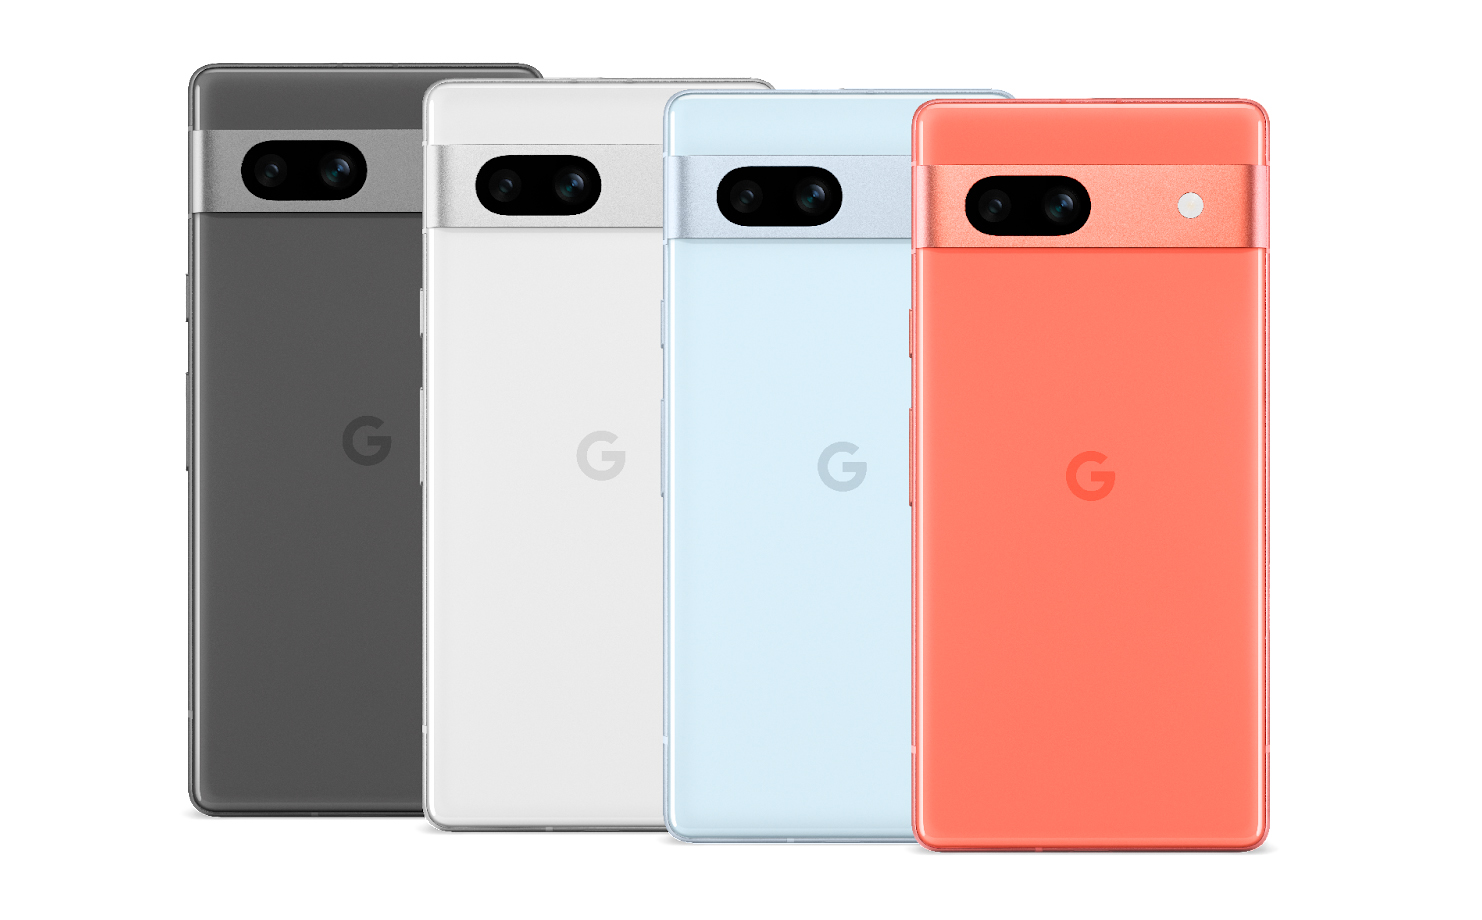 Google Pixel 7a: Features, colors, pricing